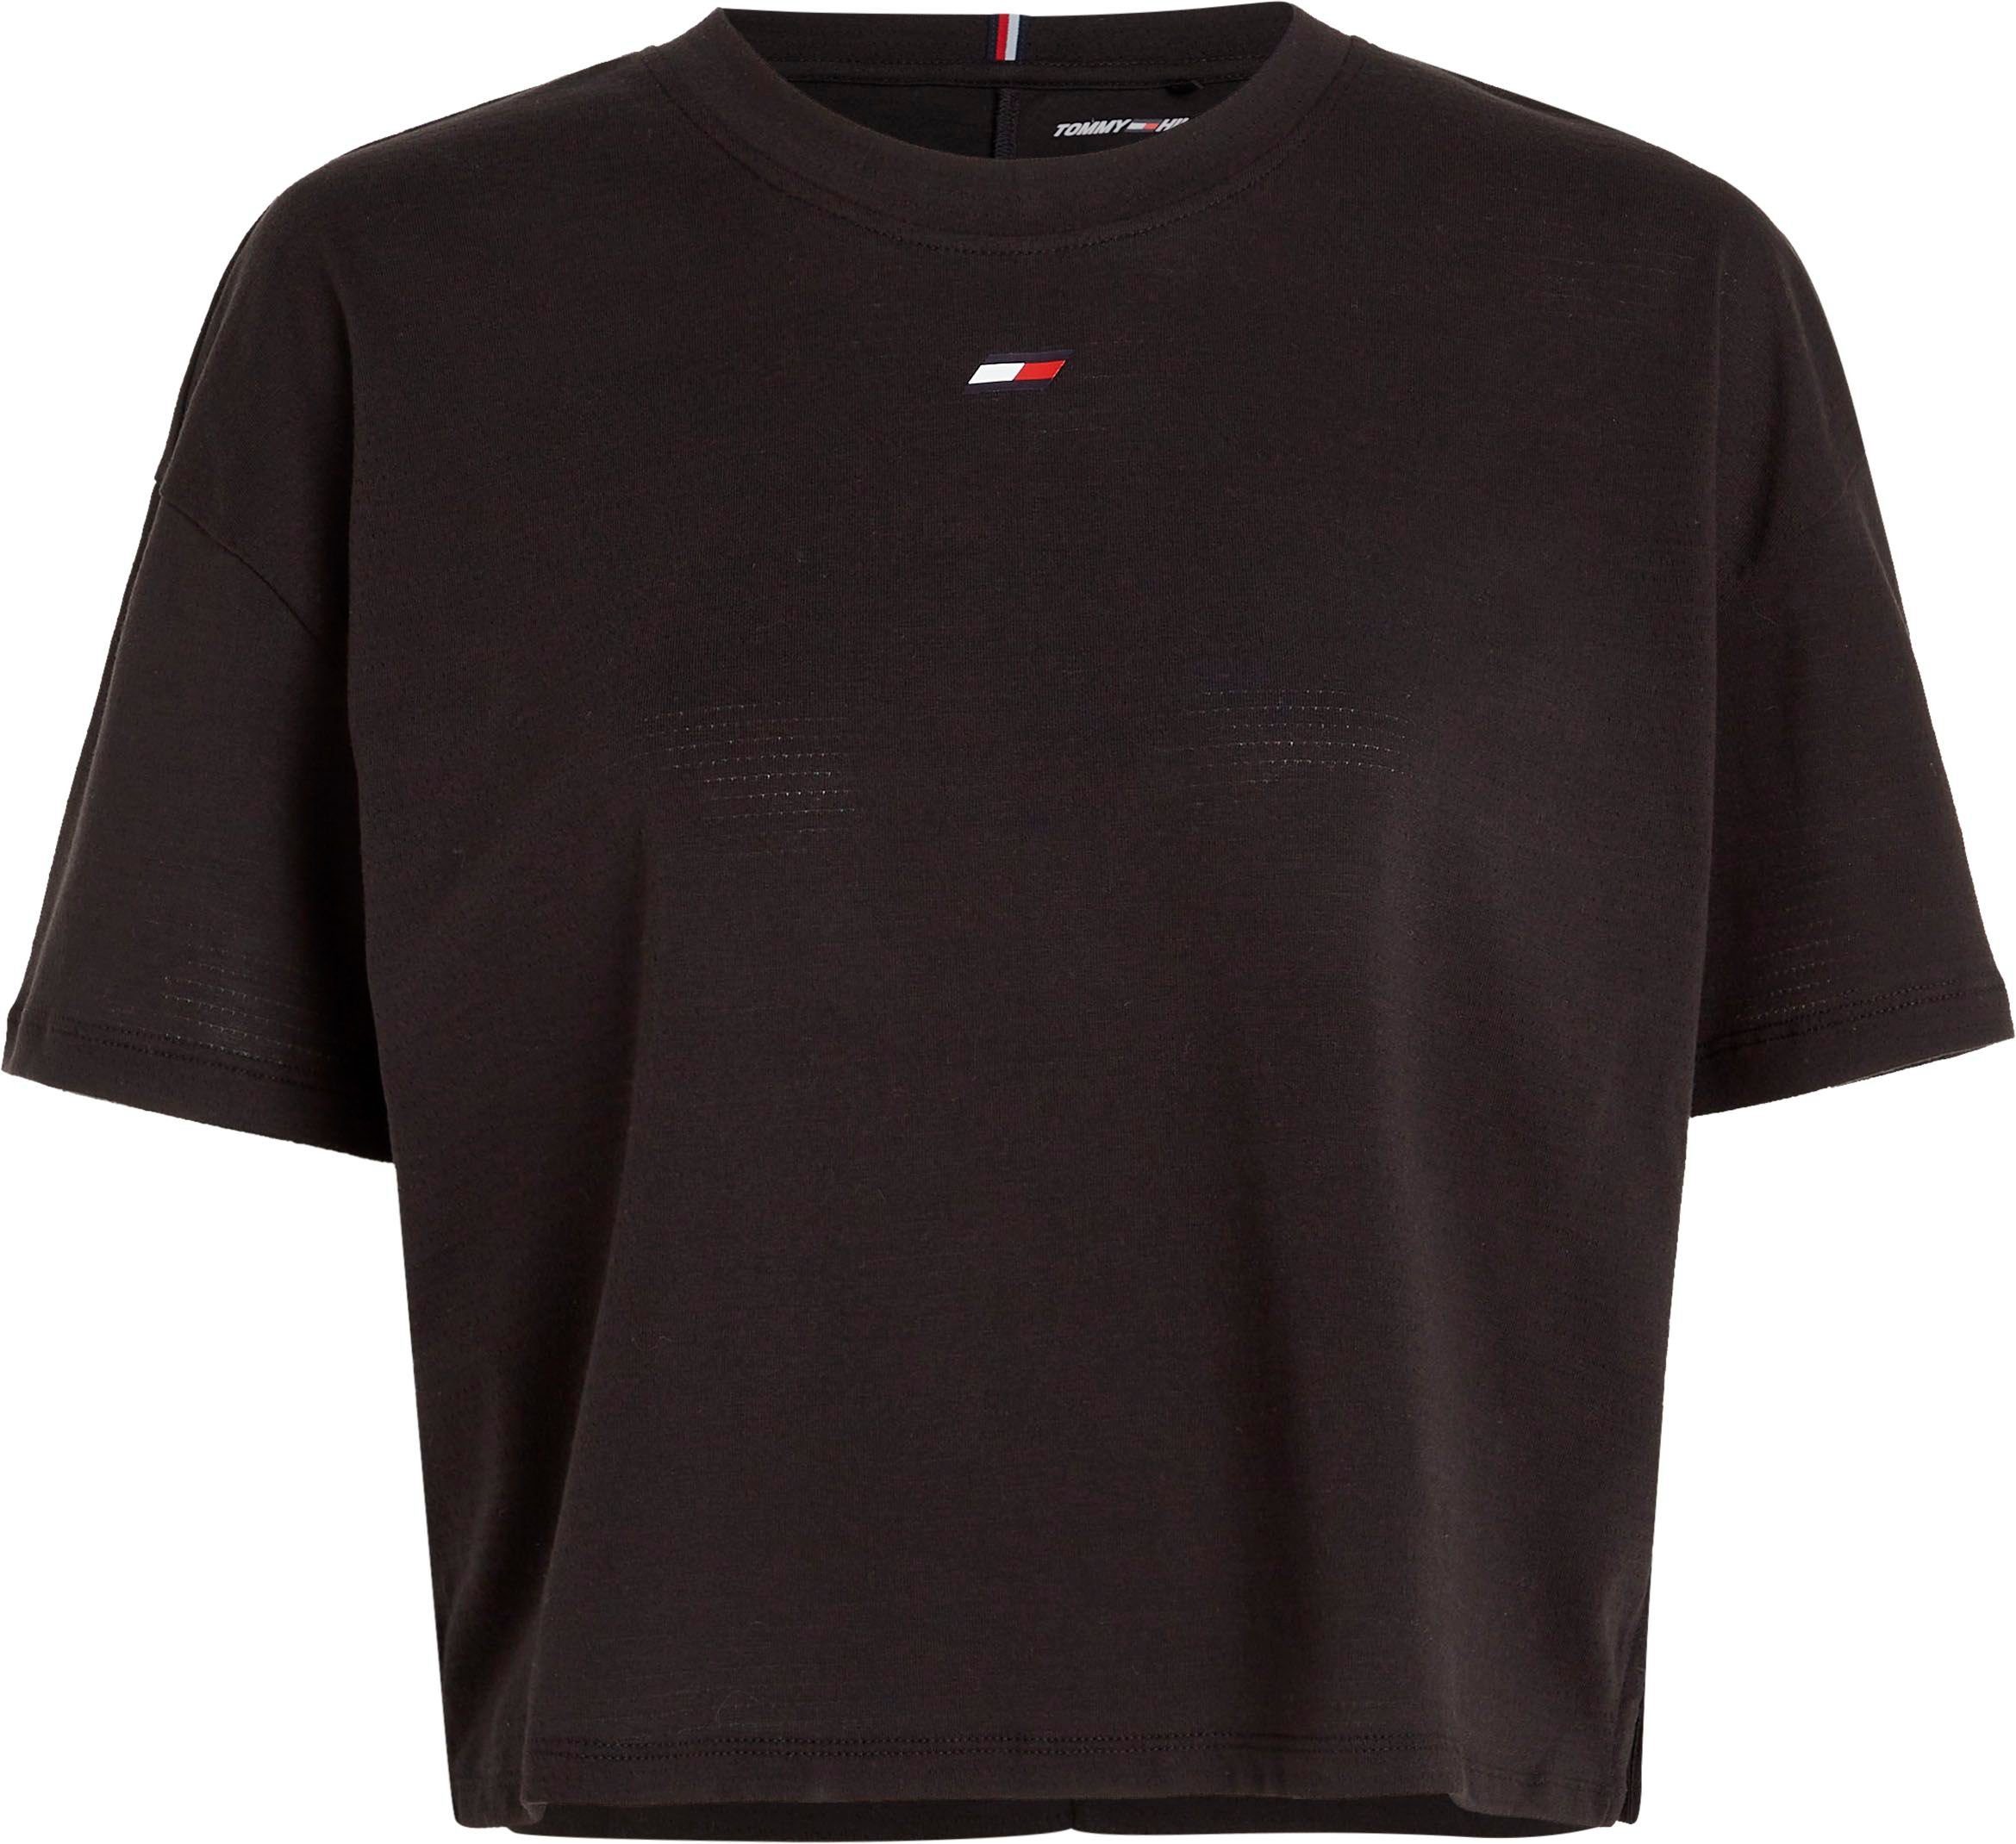 Form in CROPPED Hilfiger Sport ESSENTIALS cropped TEE RELAXED T-Shirt Tommy Black modischer